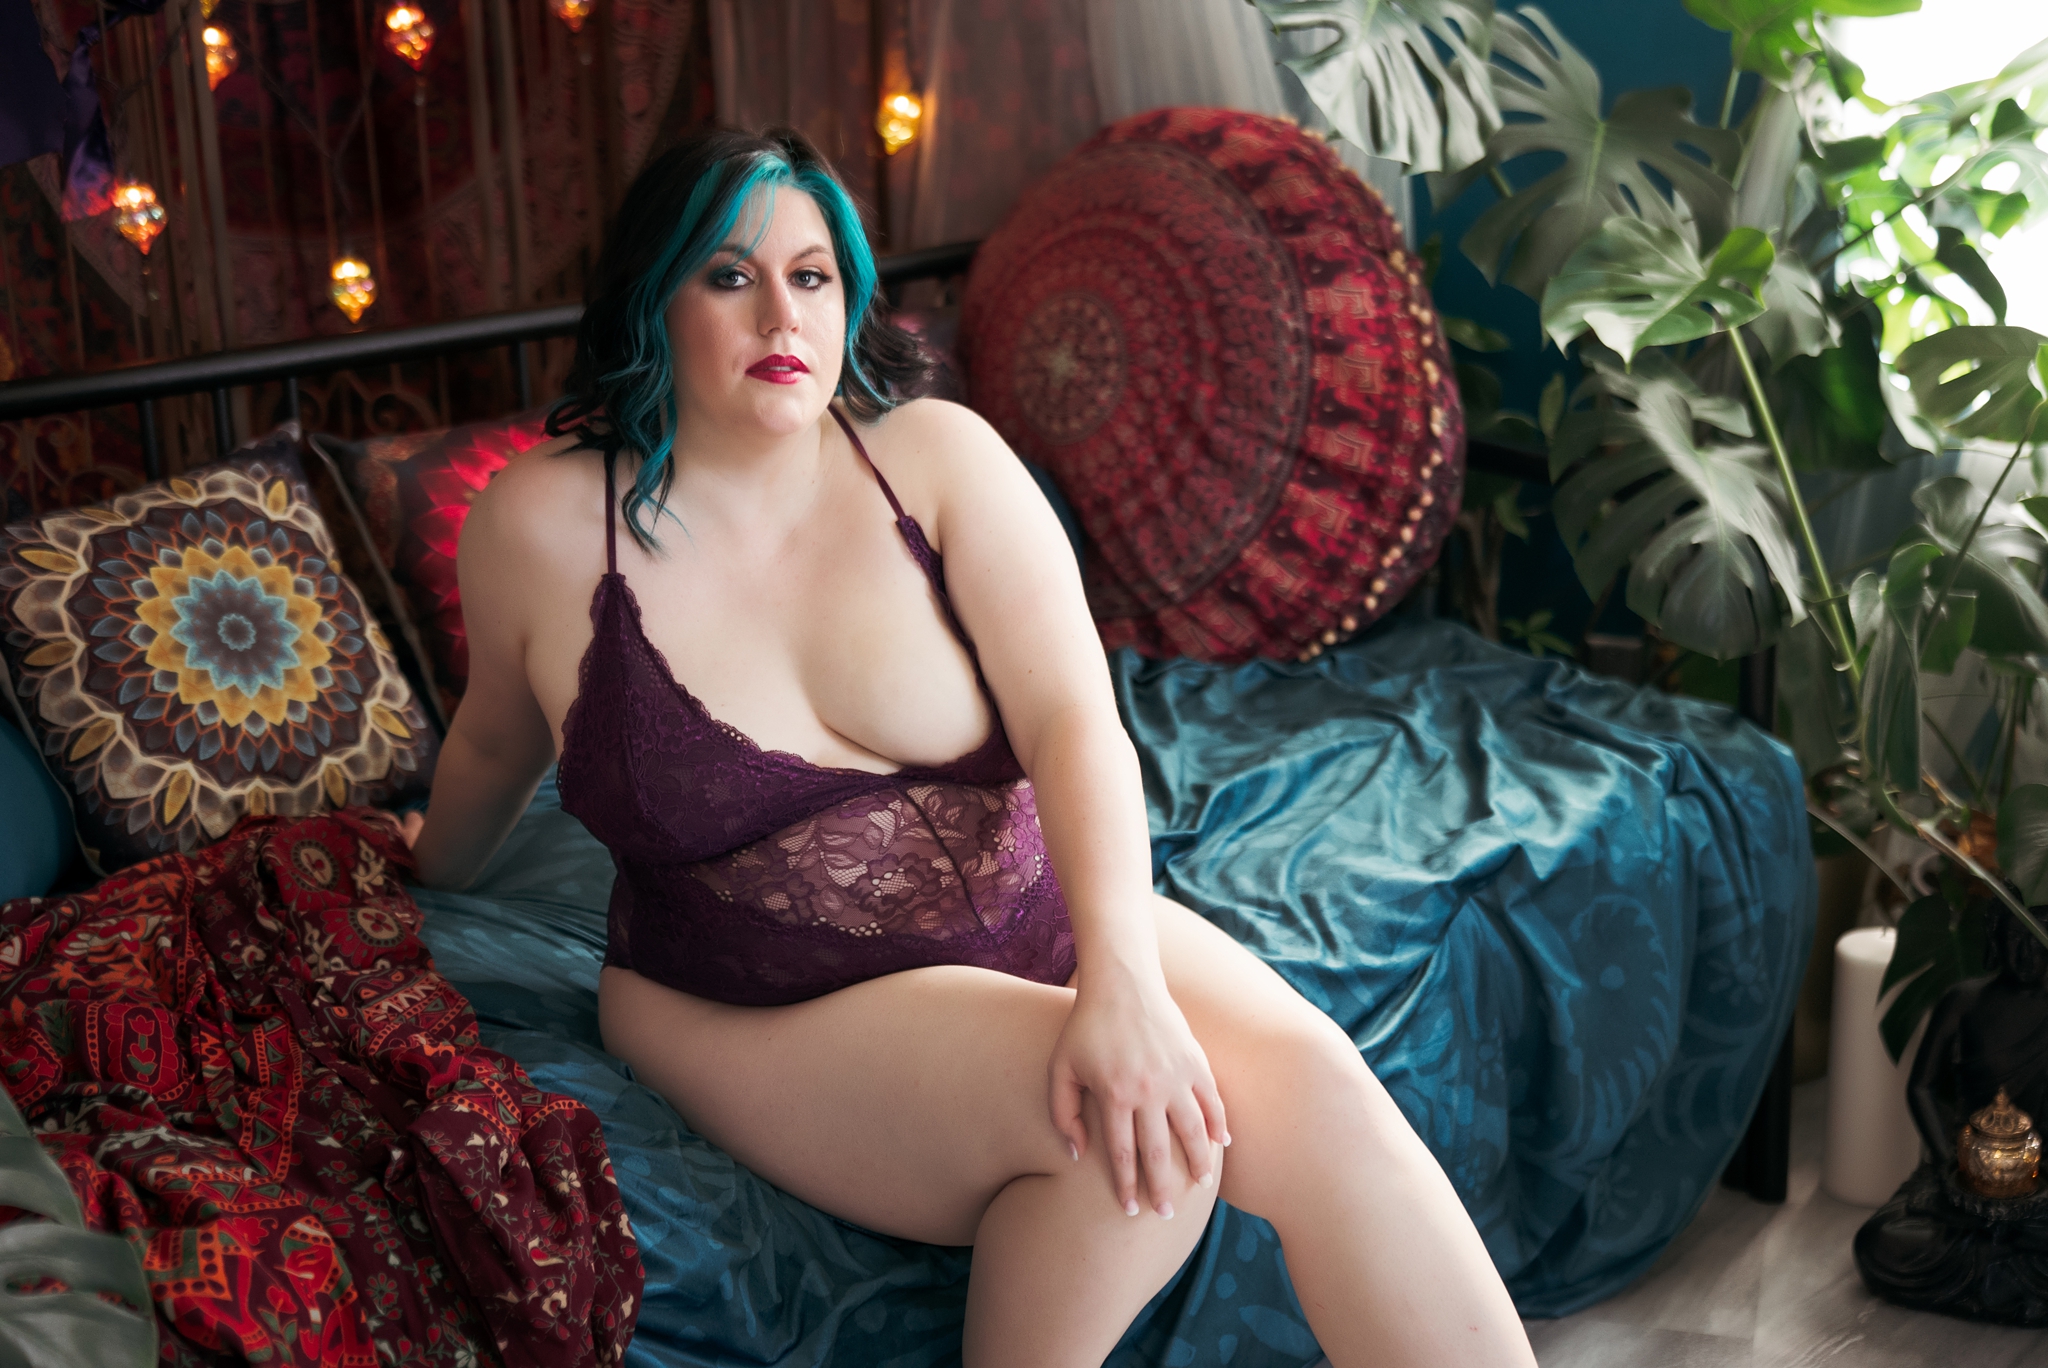 Miss M sits on a turquoise couch in front of colorful decorative pillows and plants in our Virginia Boudoir Studio